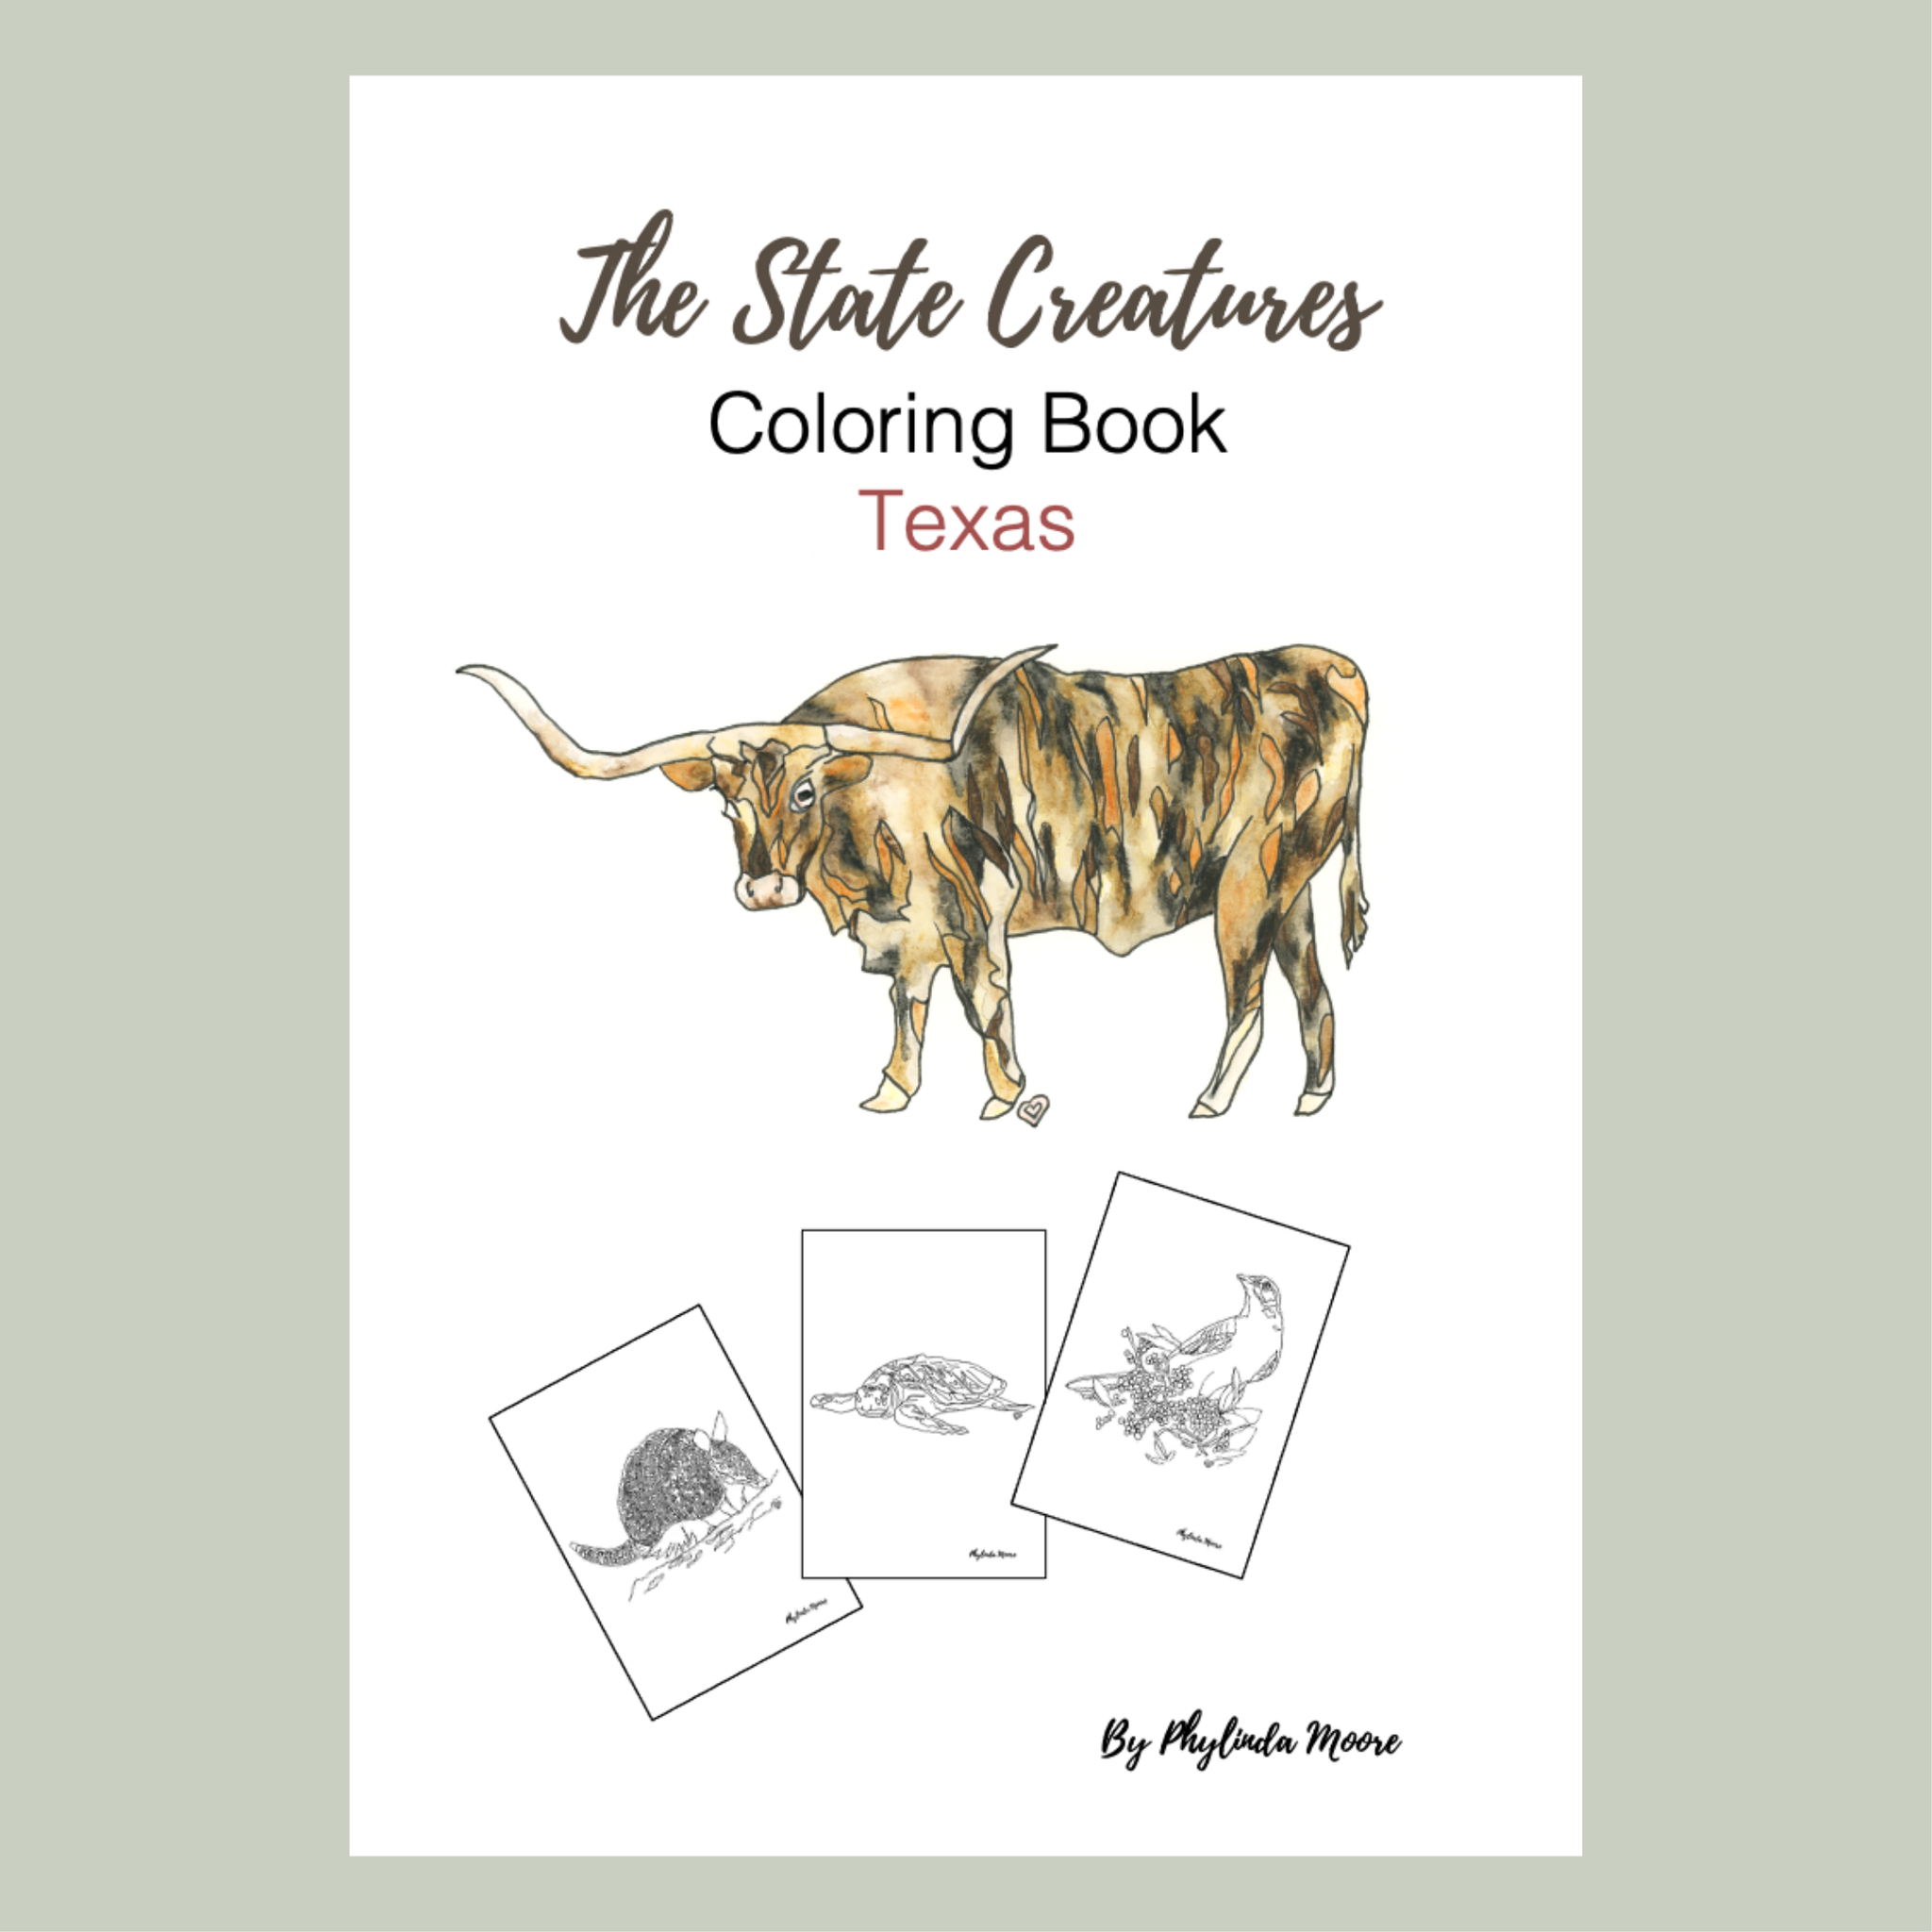 Texas state creatures coloring book print and color â phylinda moore